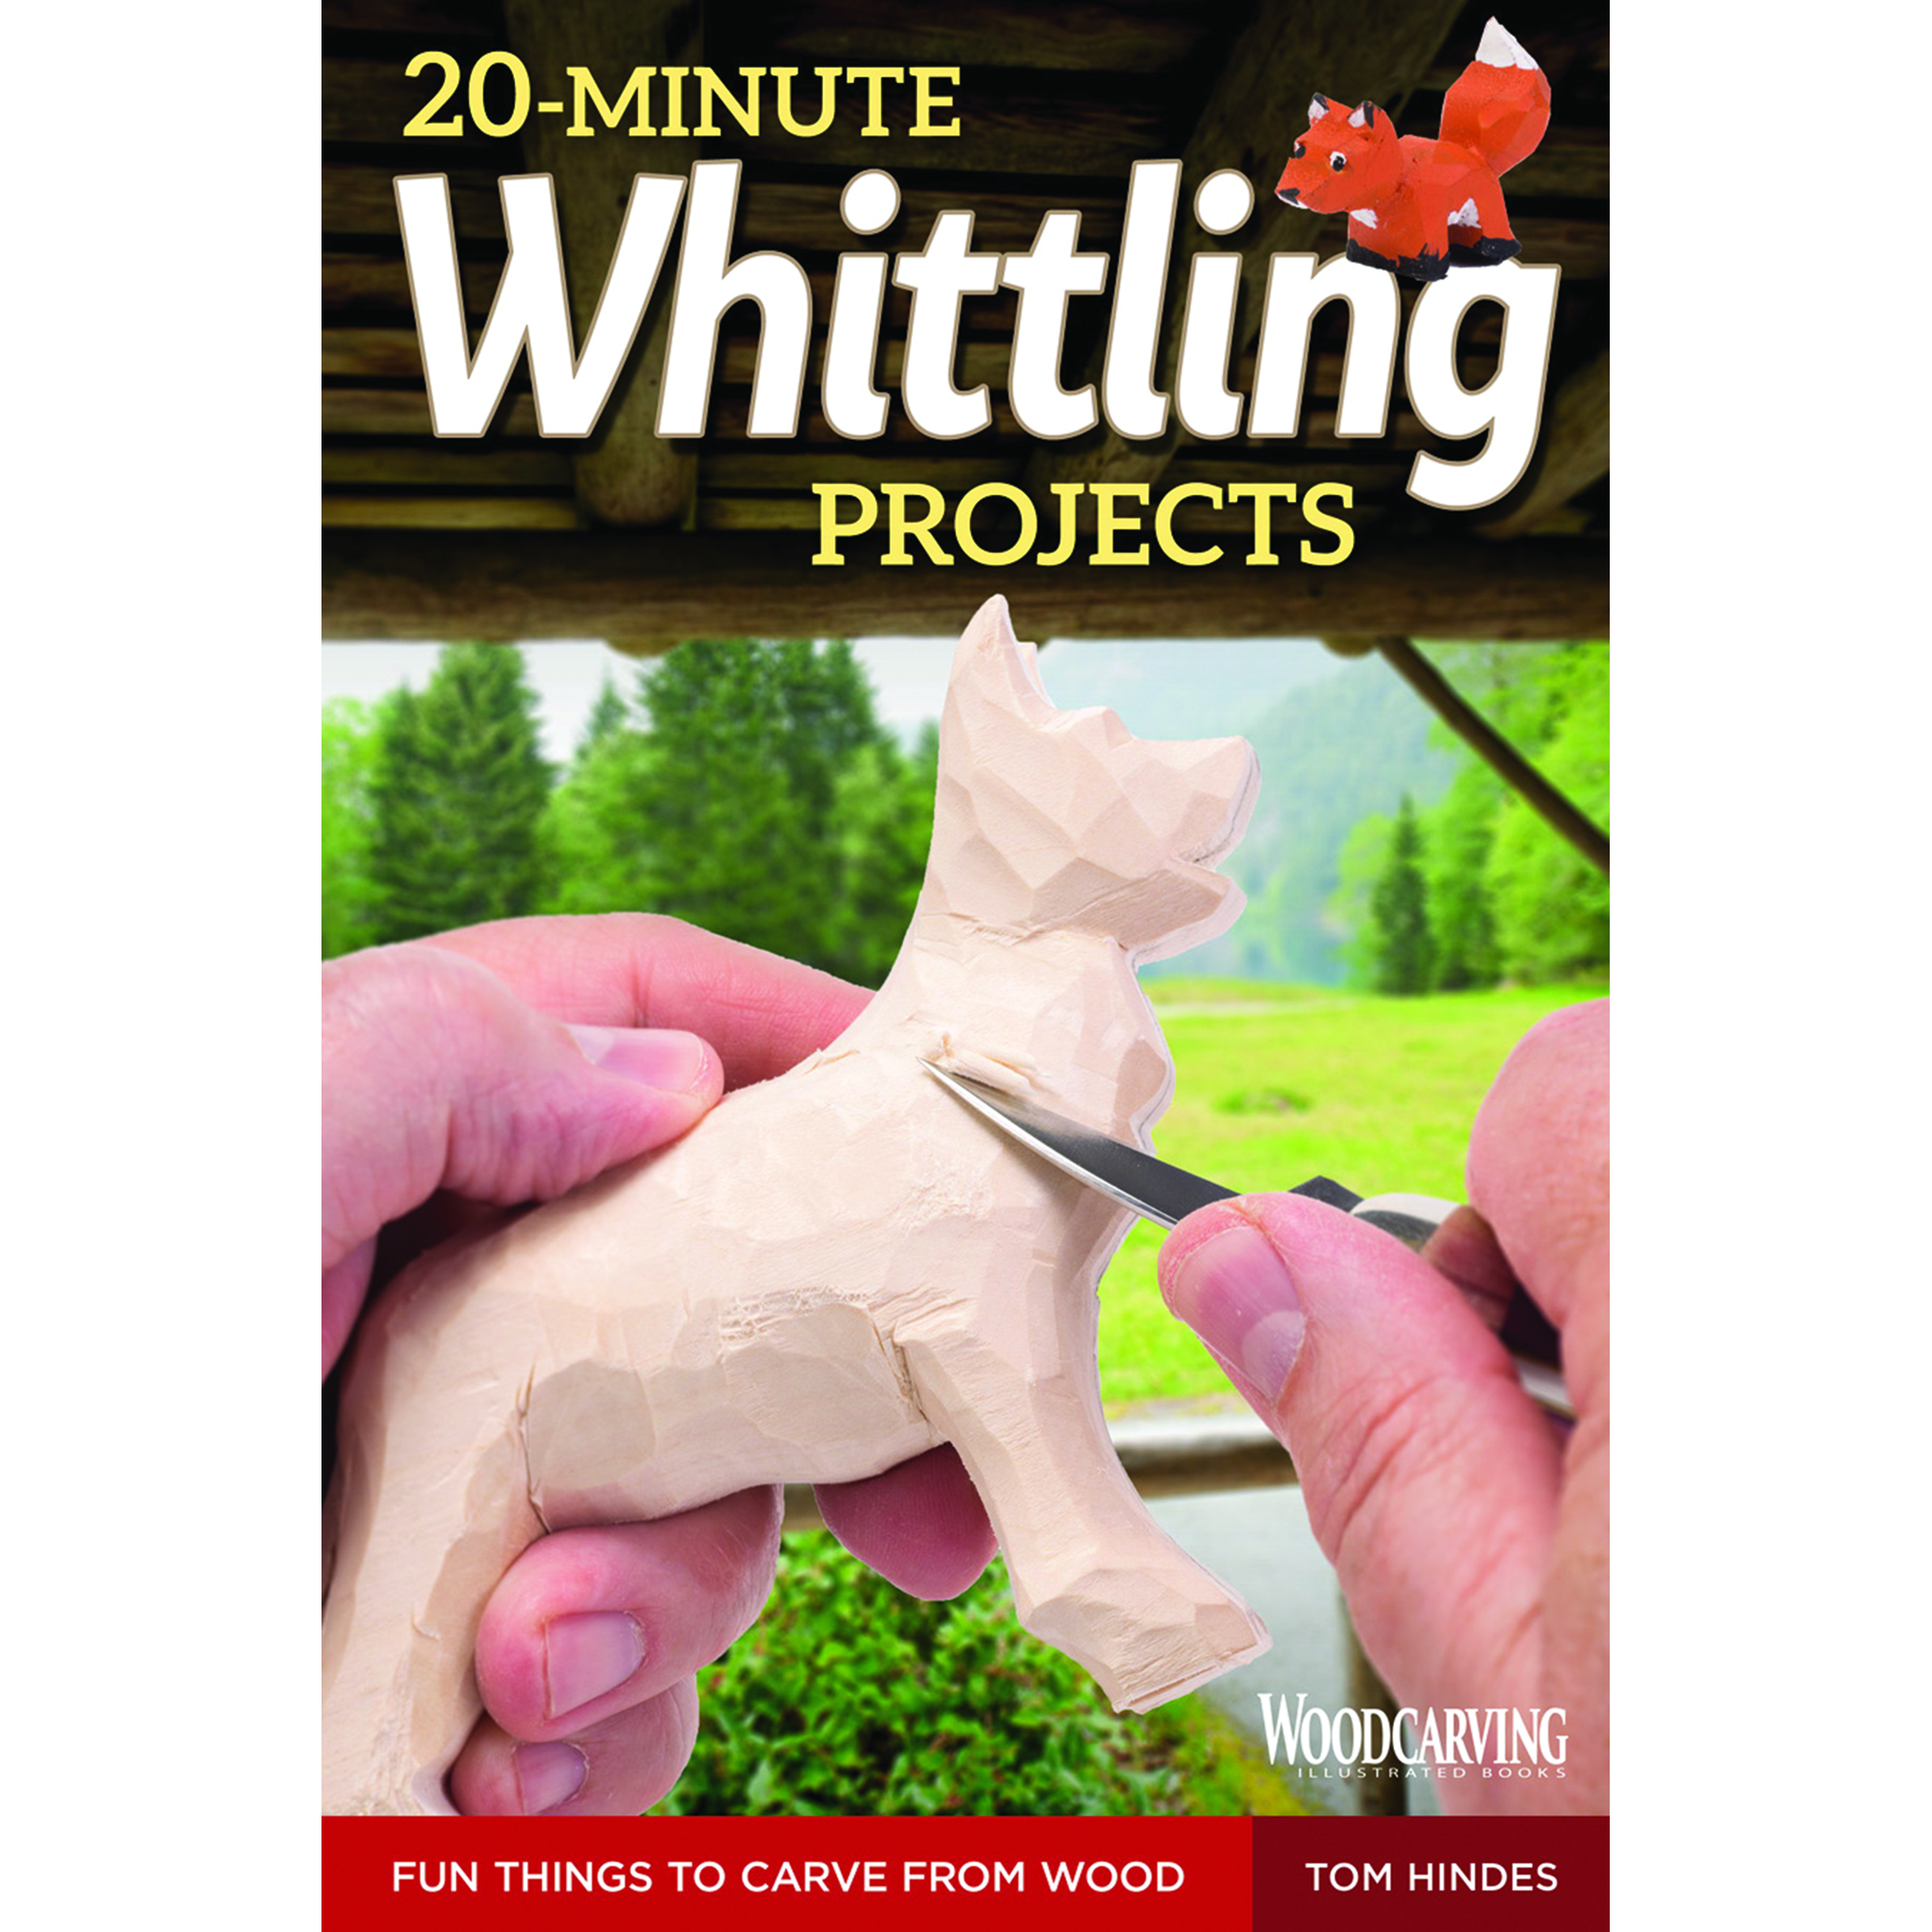 20 - Minute Whittling Projects